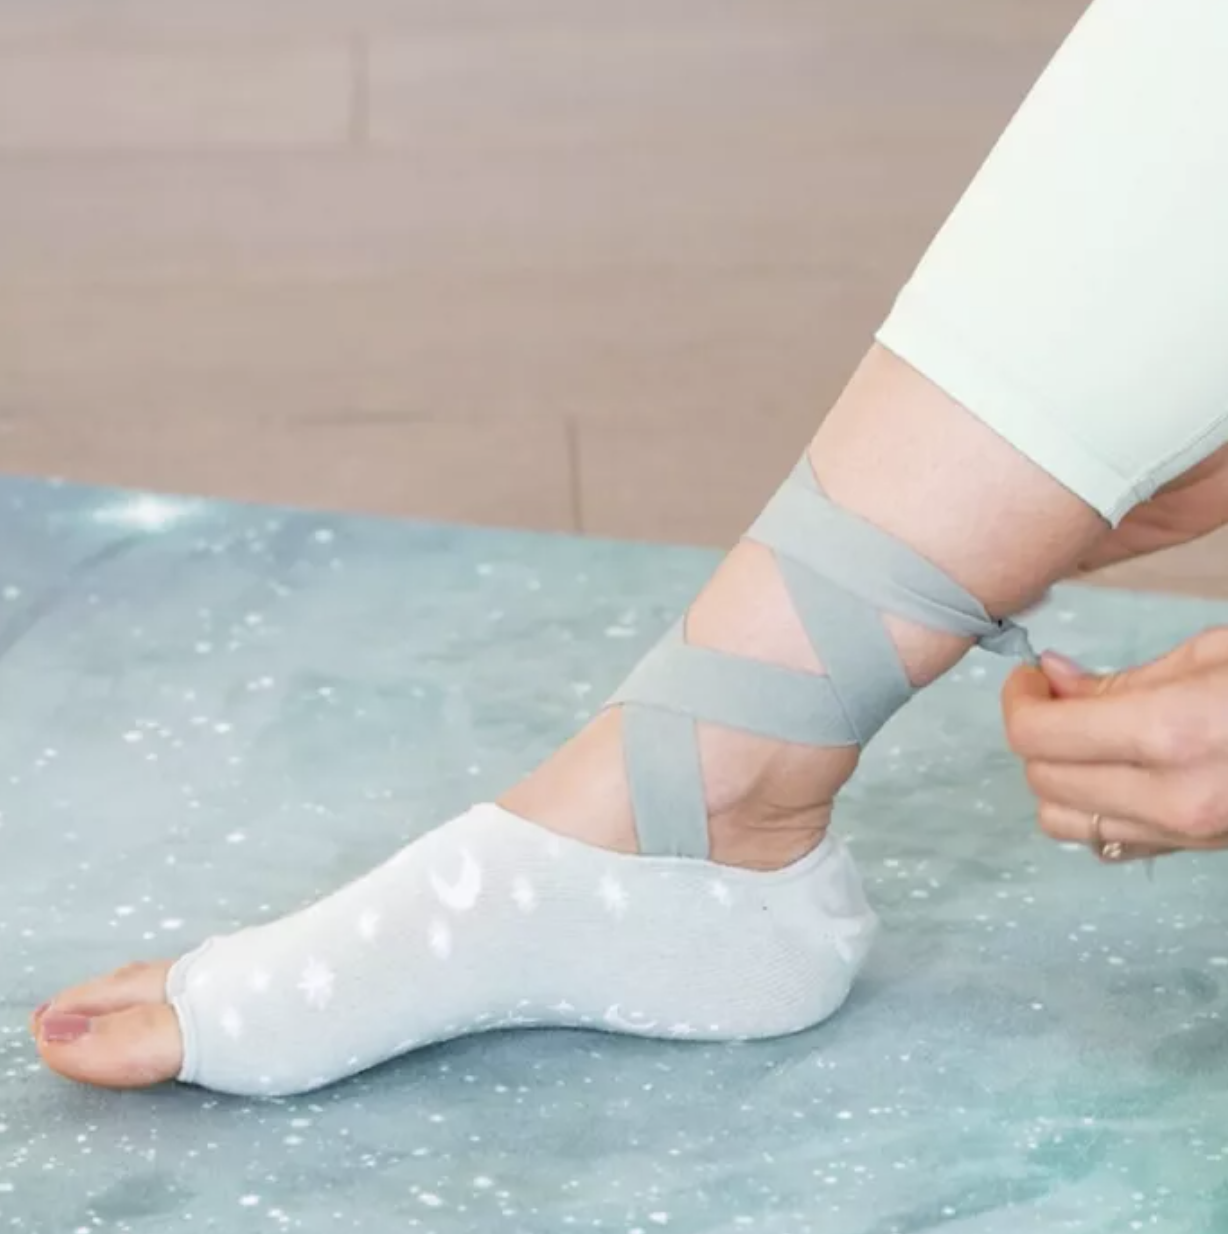 Model wears light blue lace-up grip socks with a moon and star design